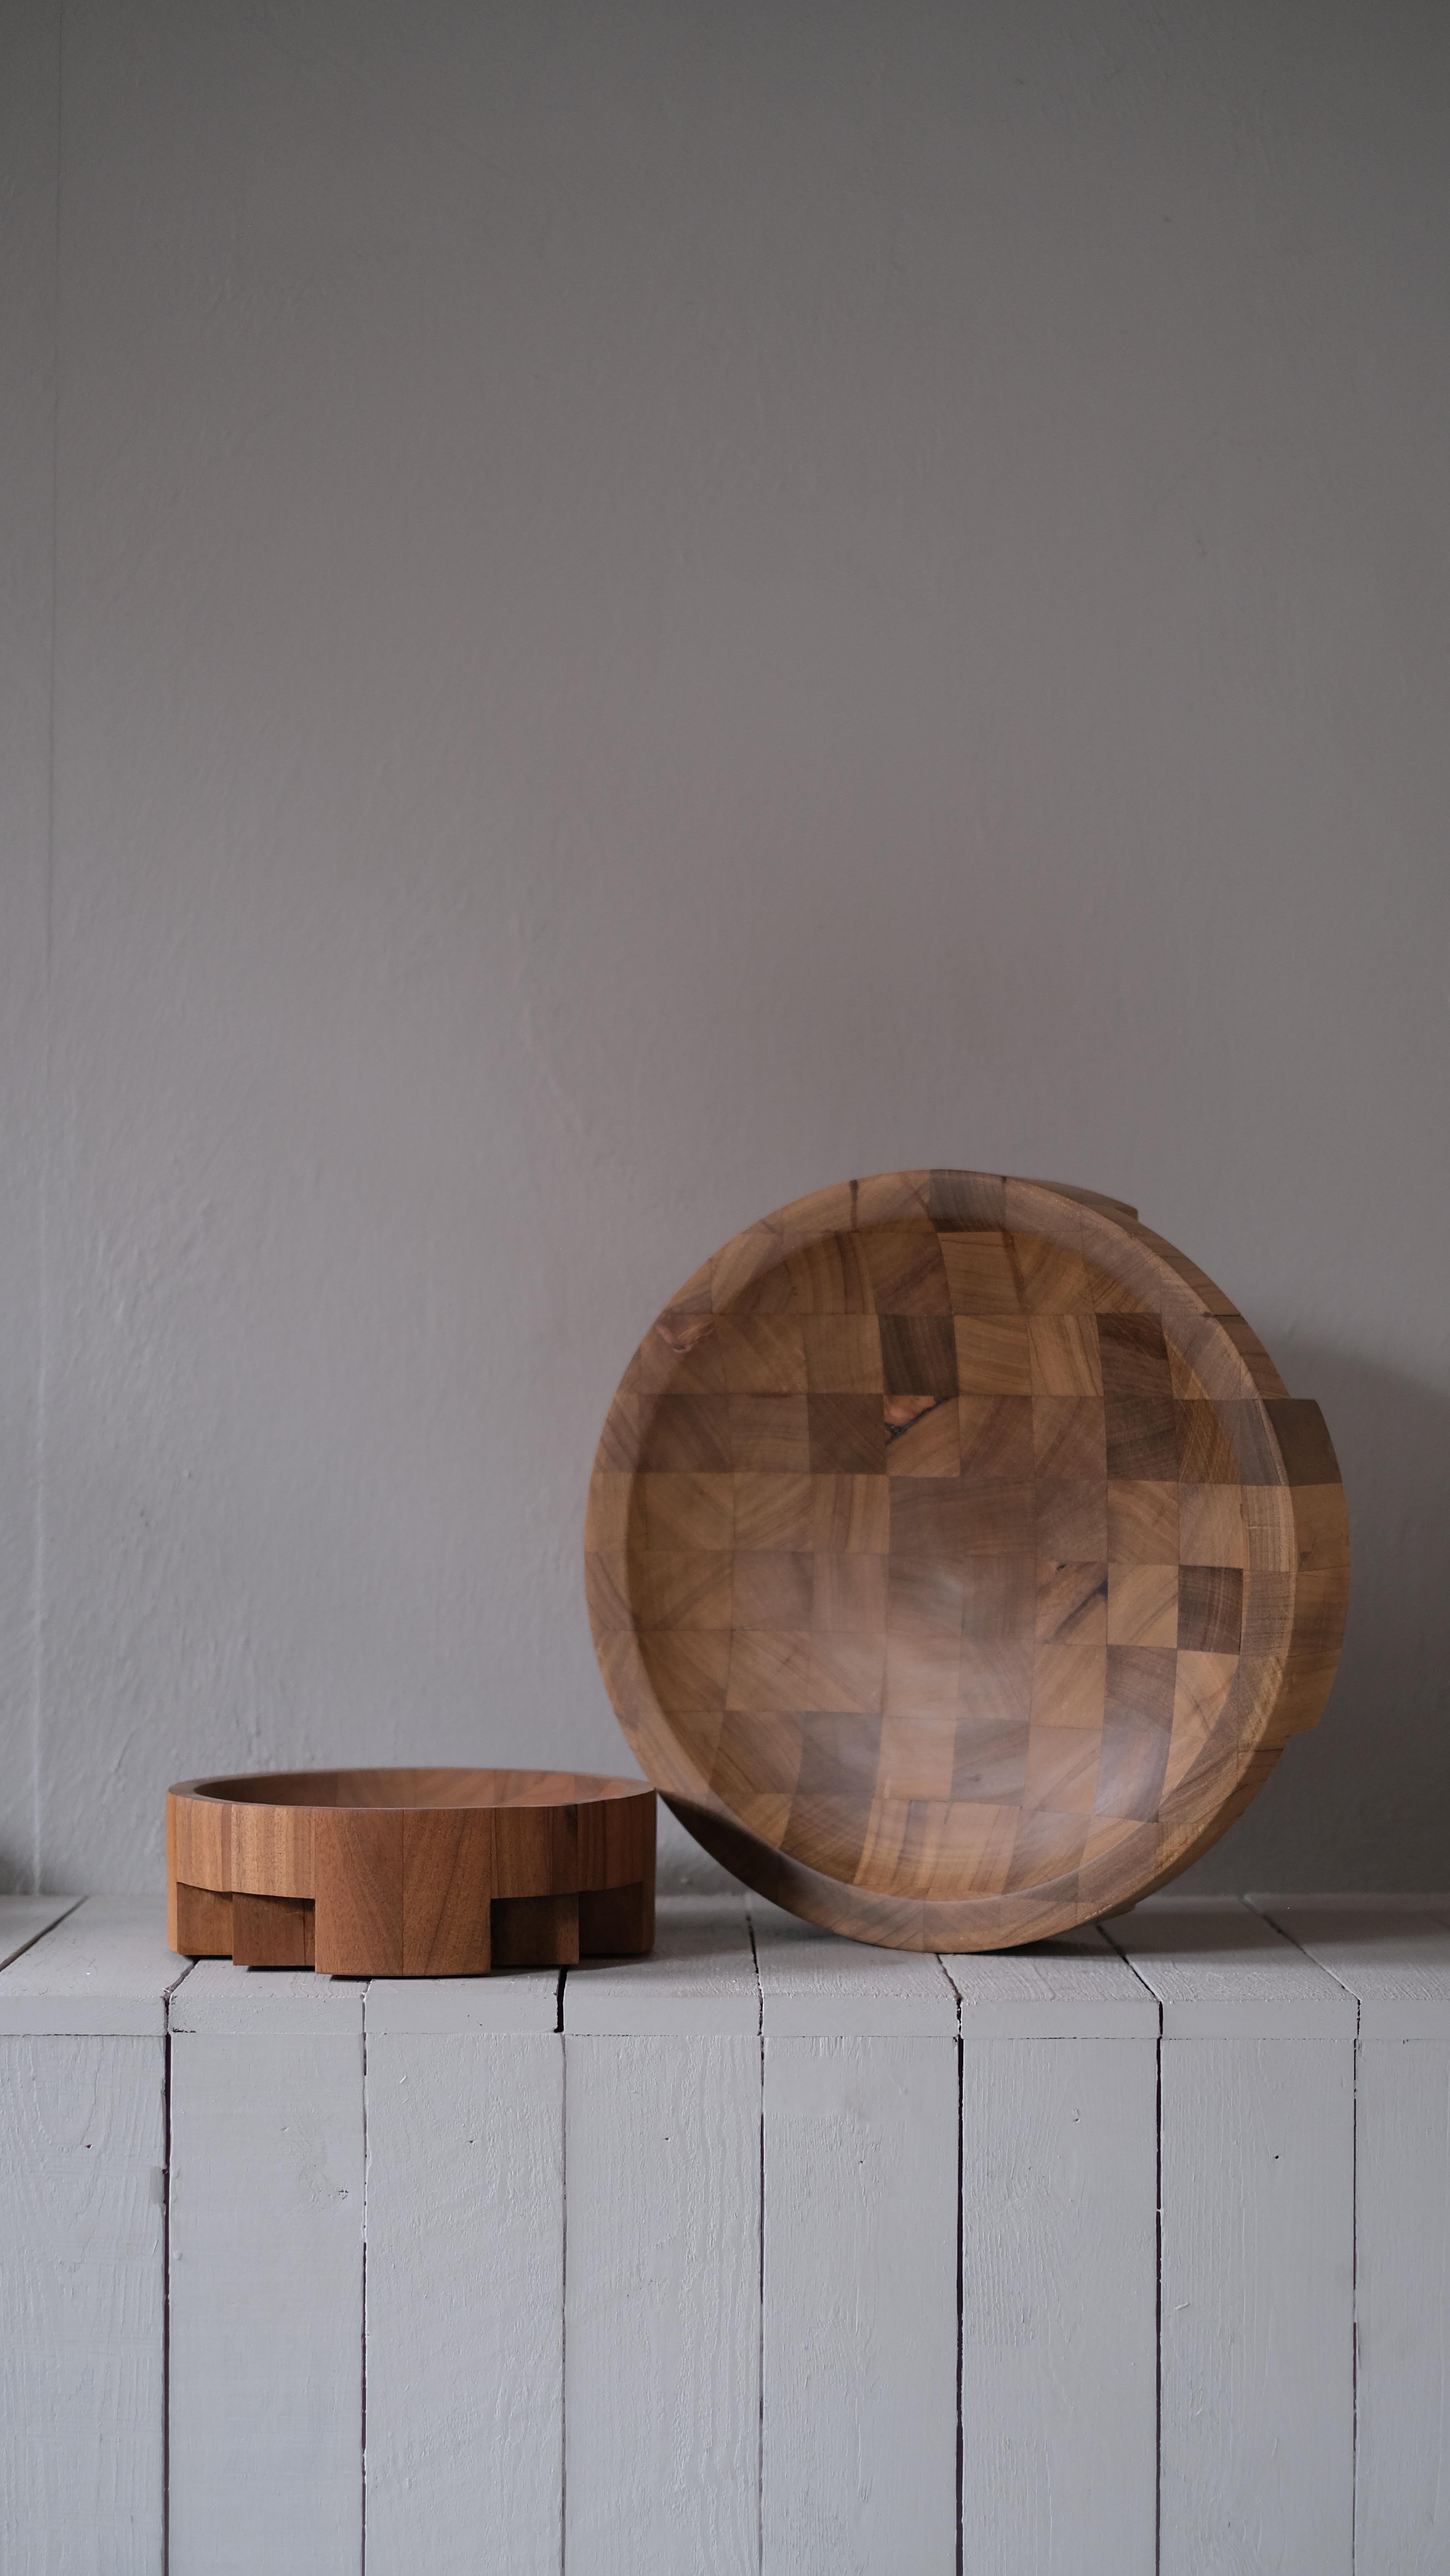 Pair of disk trays - African walnut - Signed by Arno Declercq
Made in African walnut, sanded and finished with varnish
Measures: Large 43 cm wide x 43 cm long x 9 cm high / 17” wide x 17” long x 3.5” high
Small 27 cm wide x 27 cm long x 9 cm high